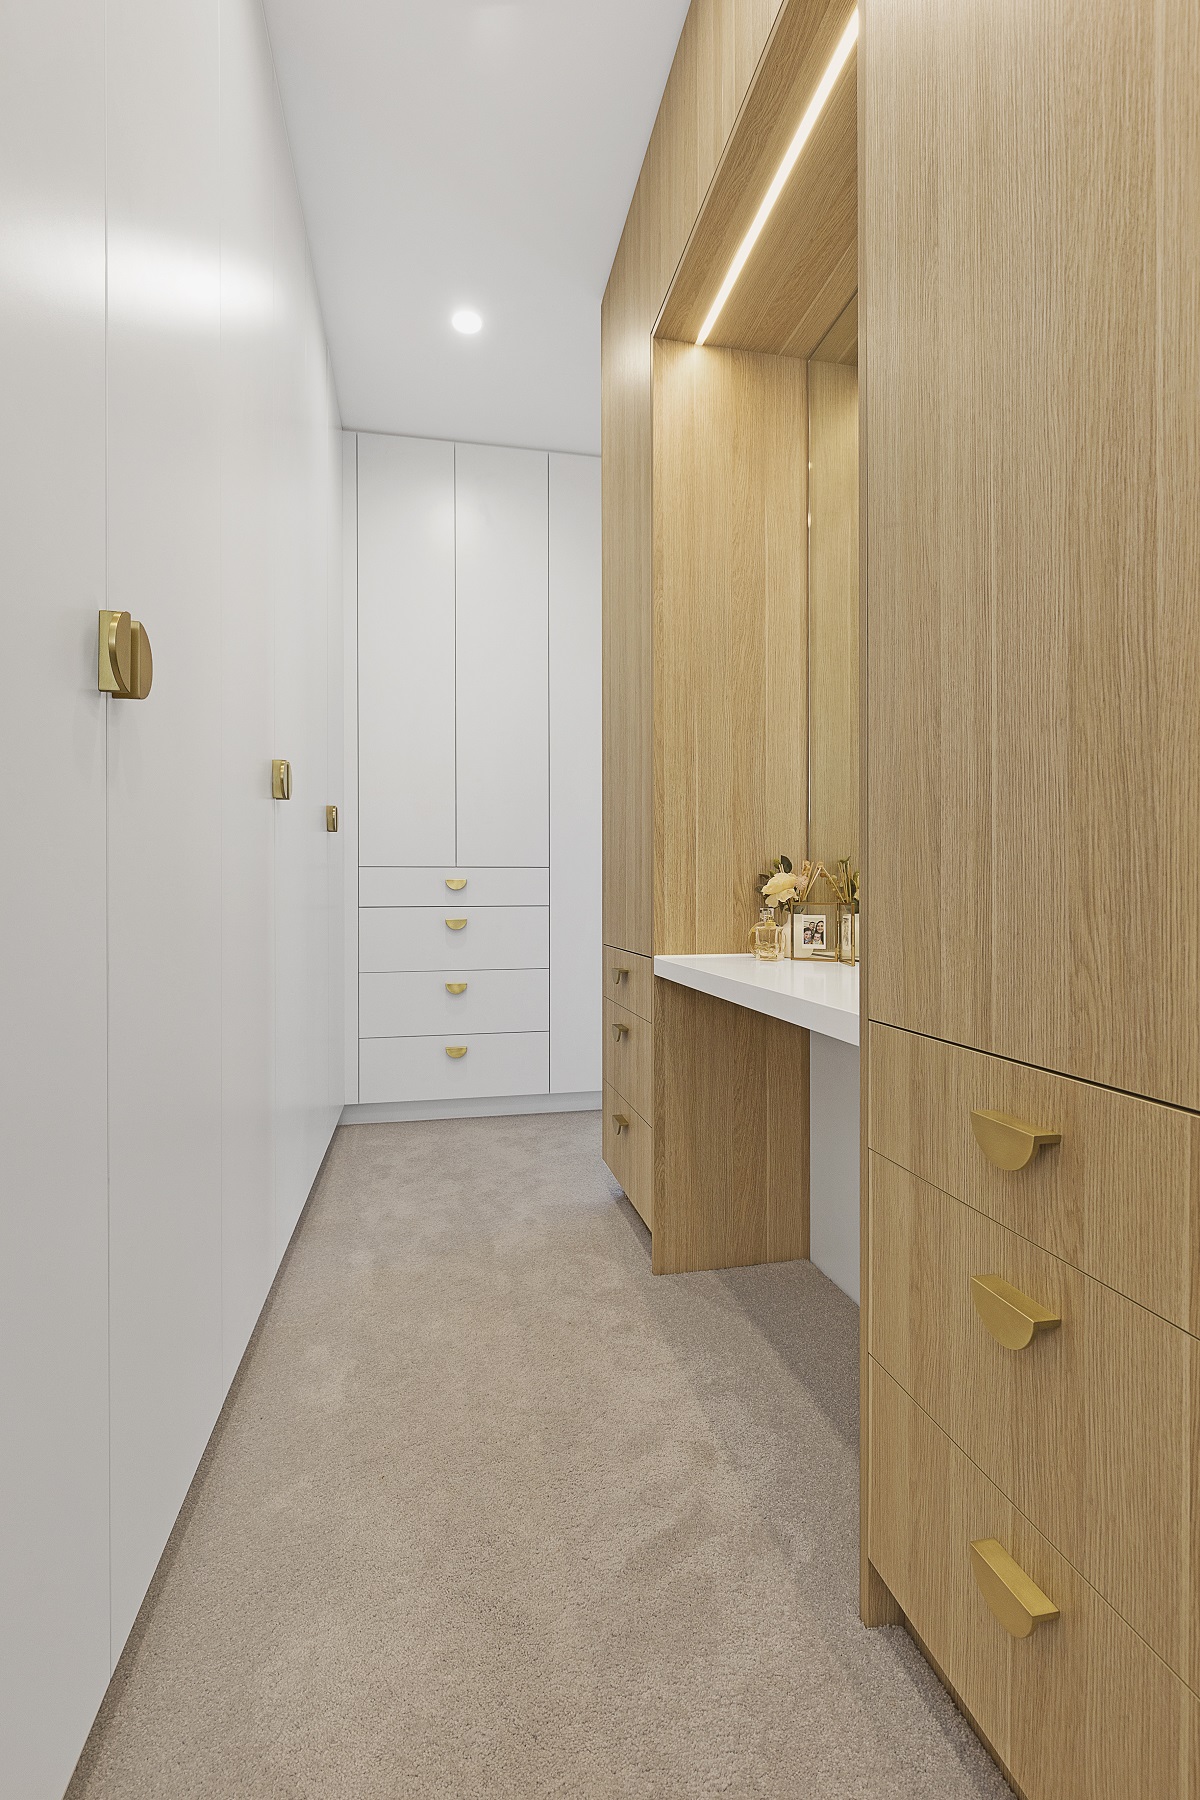 Walk-in wardrobe in a Satin Polyurethane and Timber Laminate combination with a built in vanity unit and mirror - Chipping Norton, Sydney